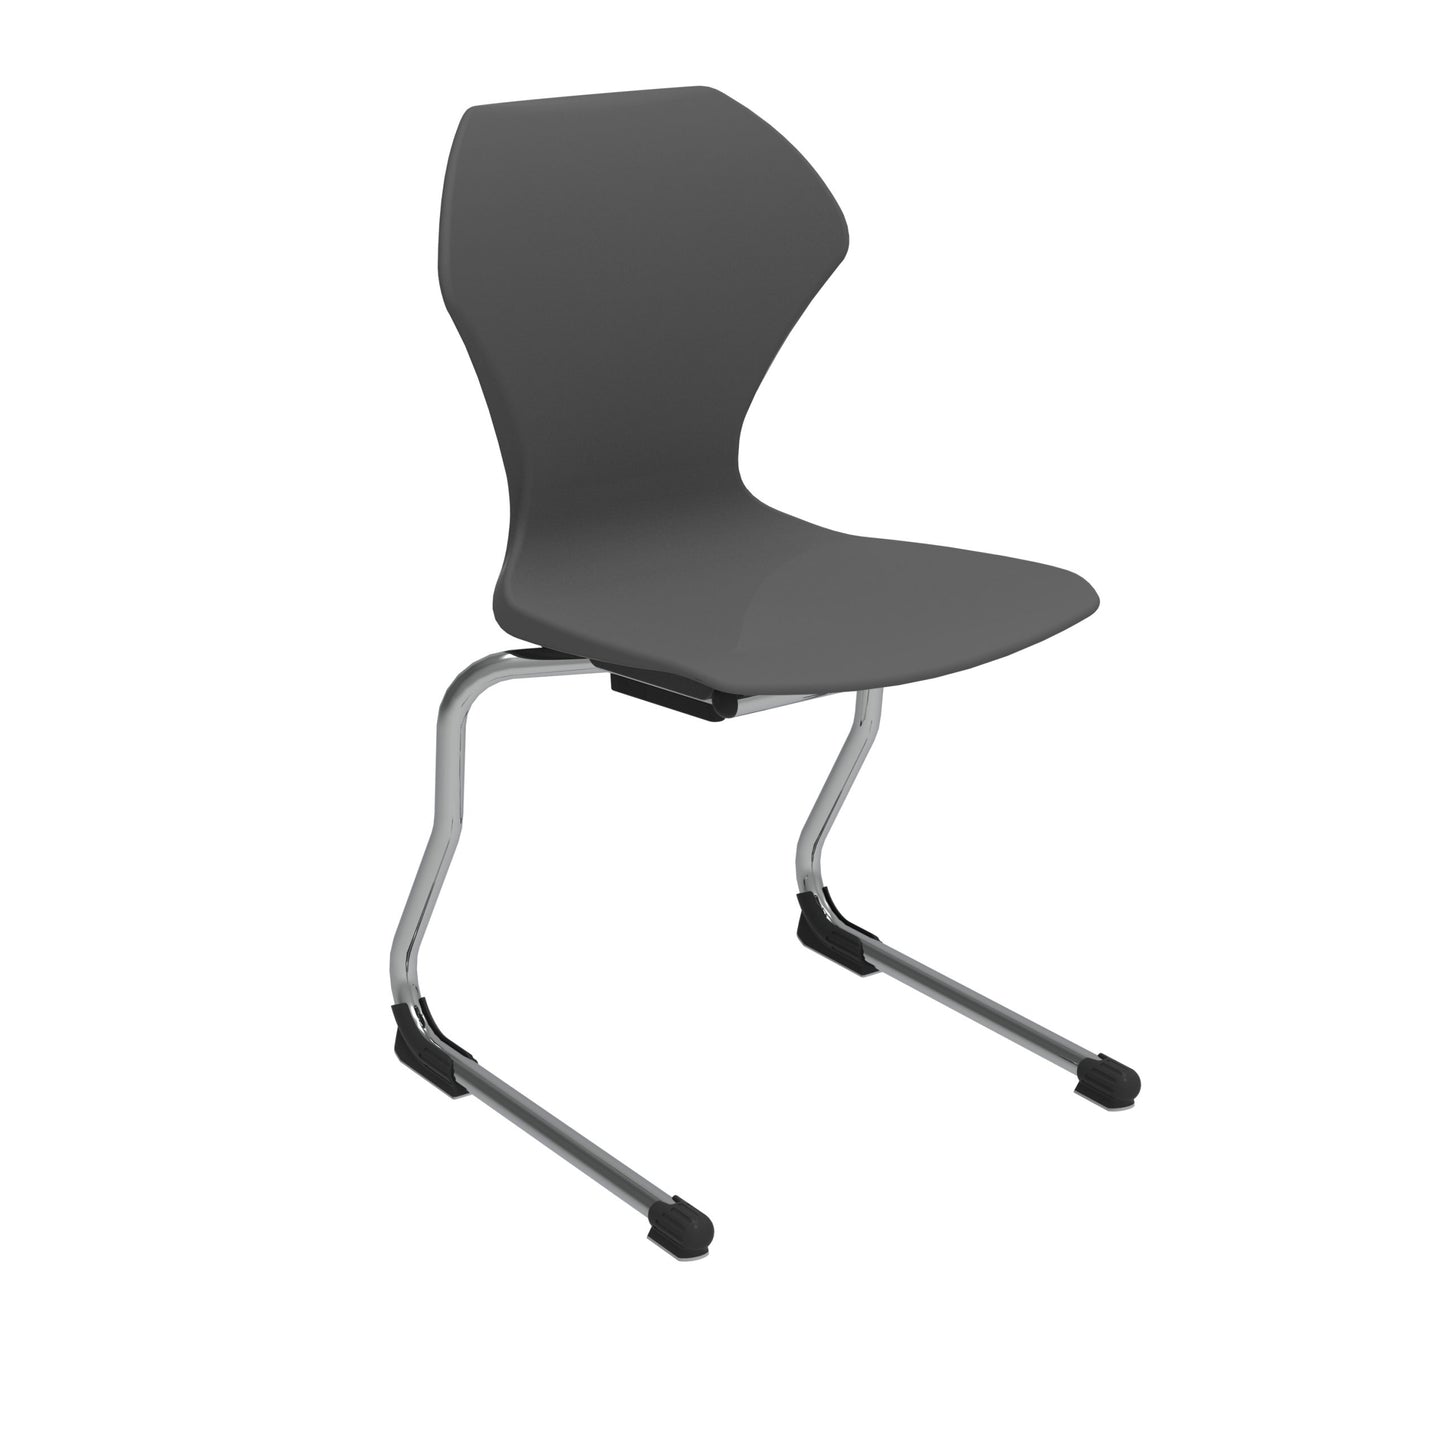 Marco Apex Series Cantilever Frame Chair 14" Seat Height (38301-14XX)